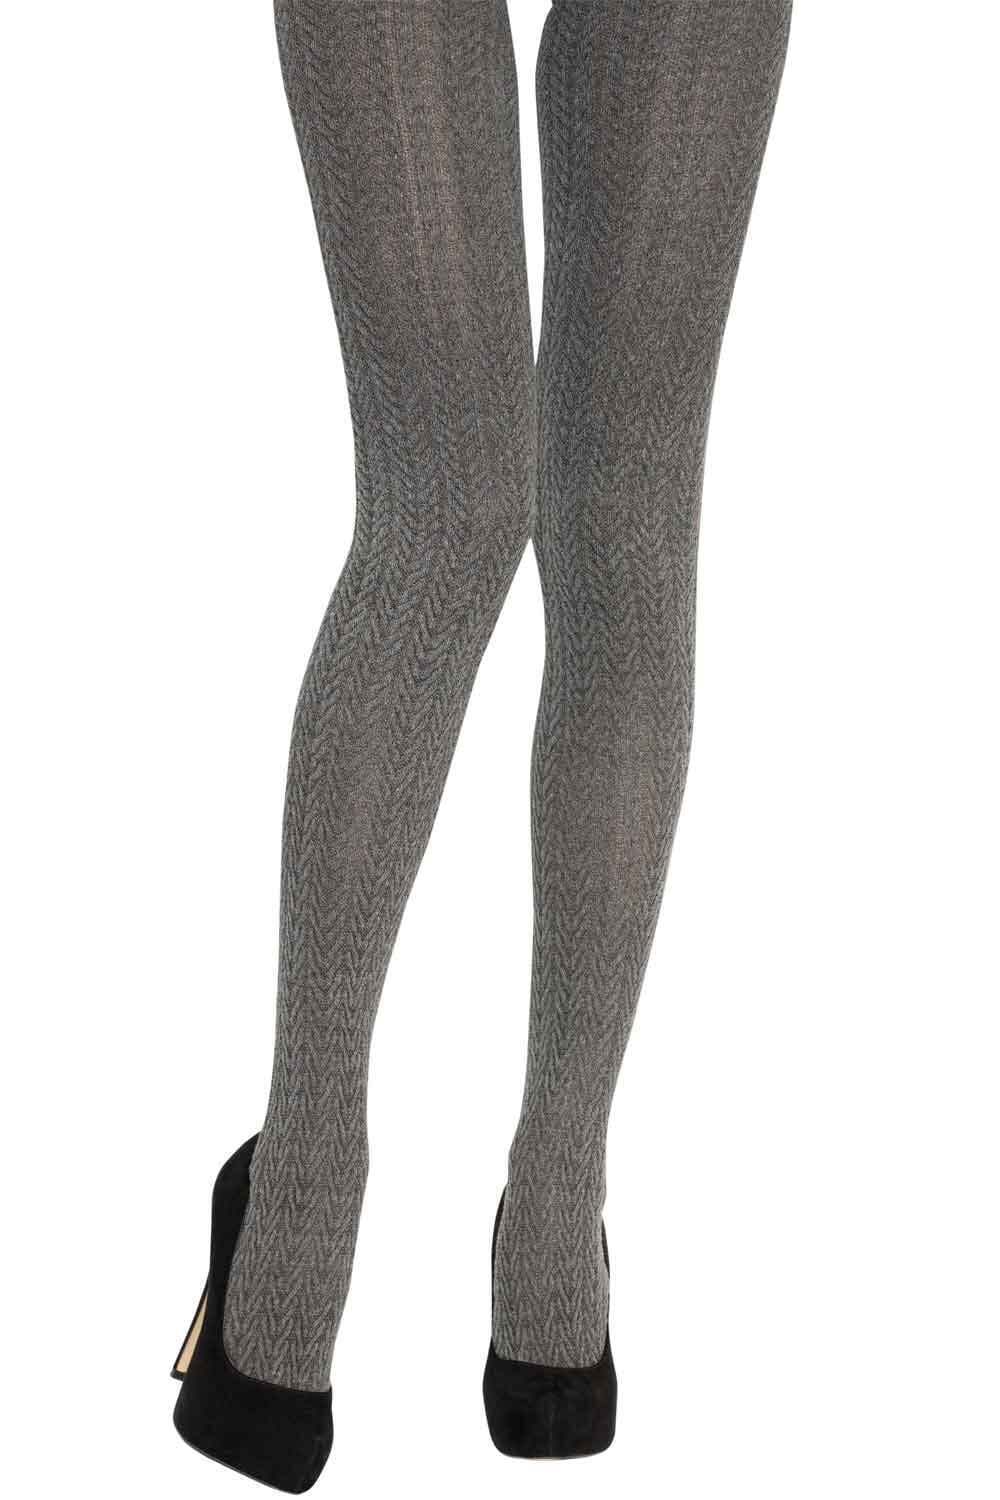 Charnos Ladies Chunky Knit Cable Knit Size M-L, Black Tights